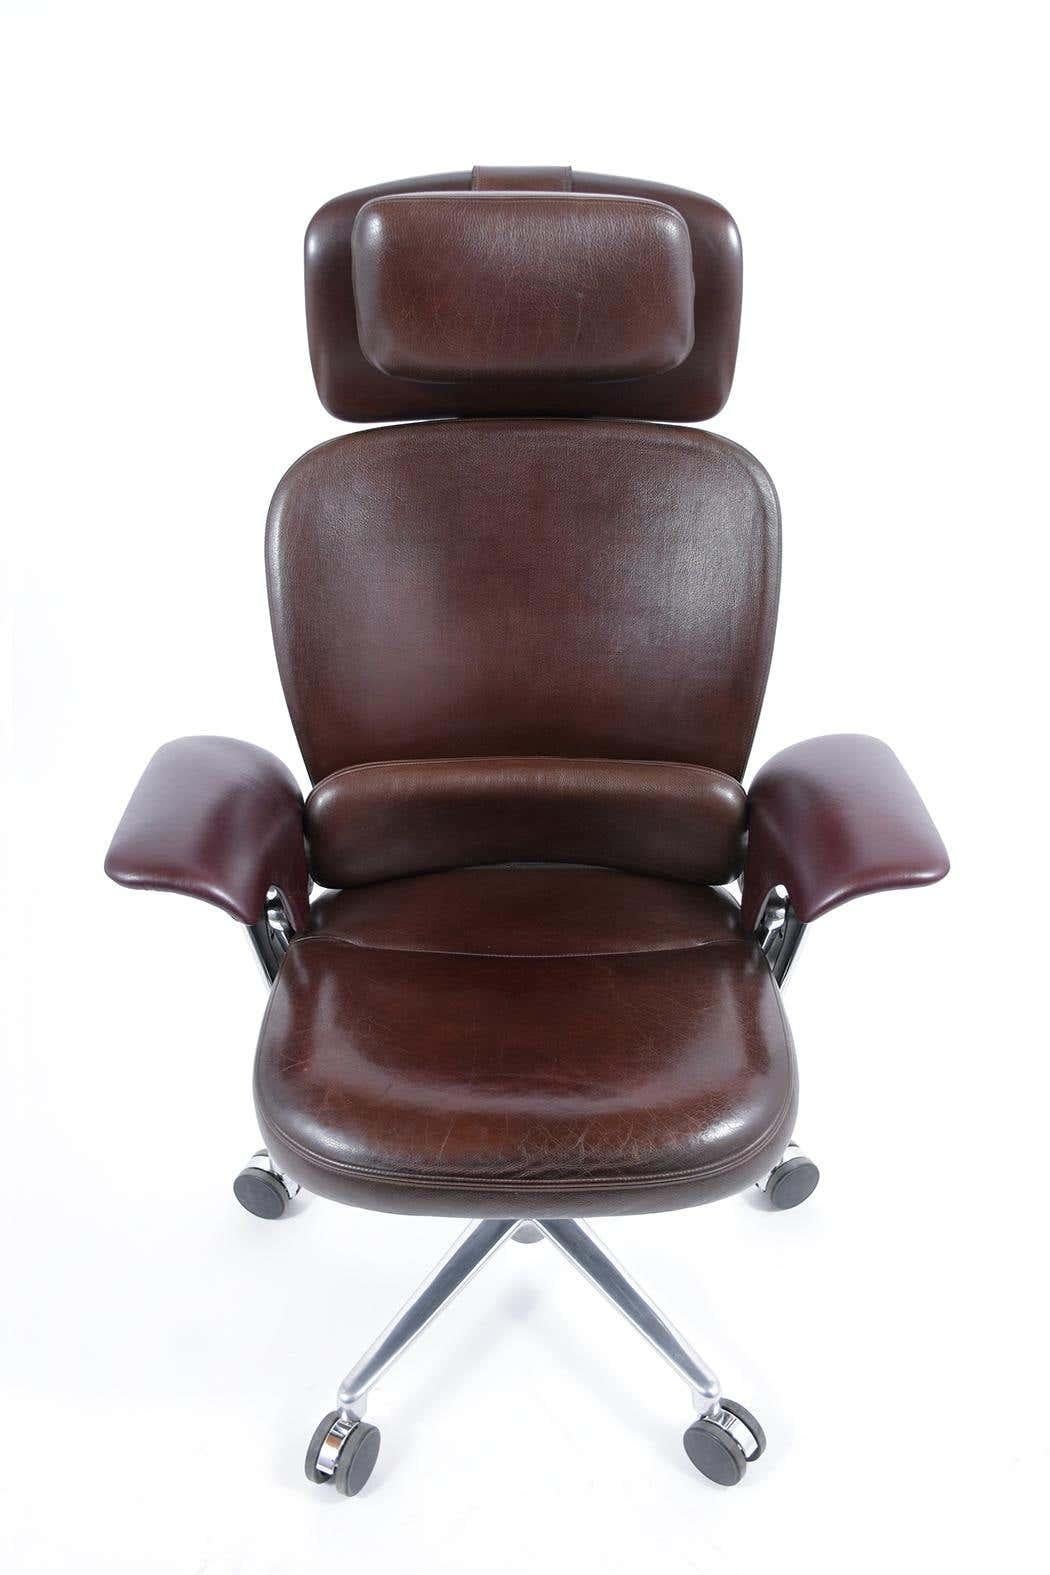 American Premium Elmo Soft Leather Executive Office Chair